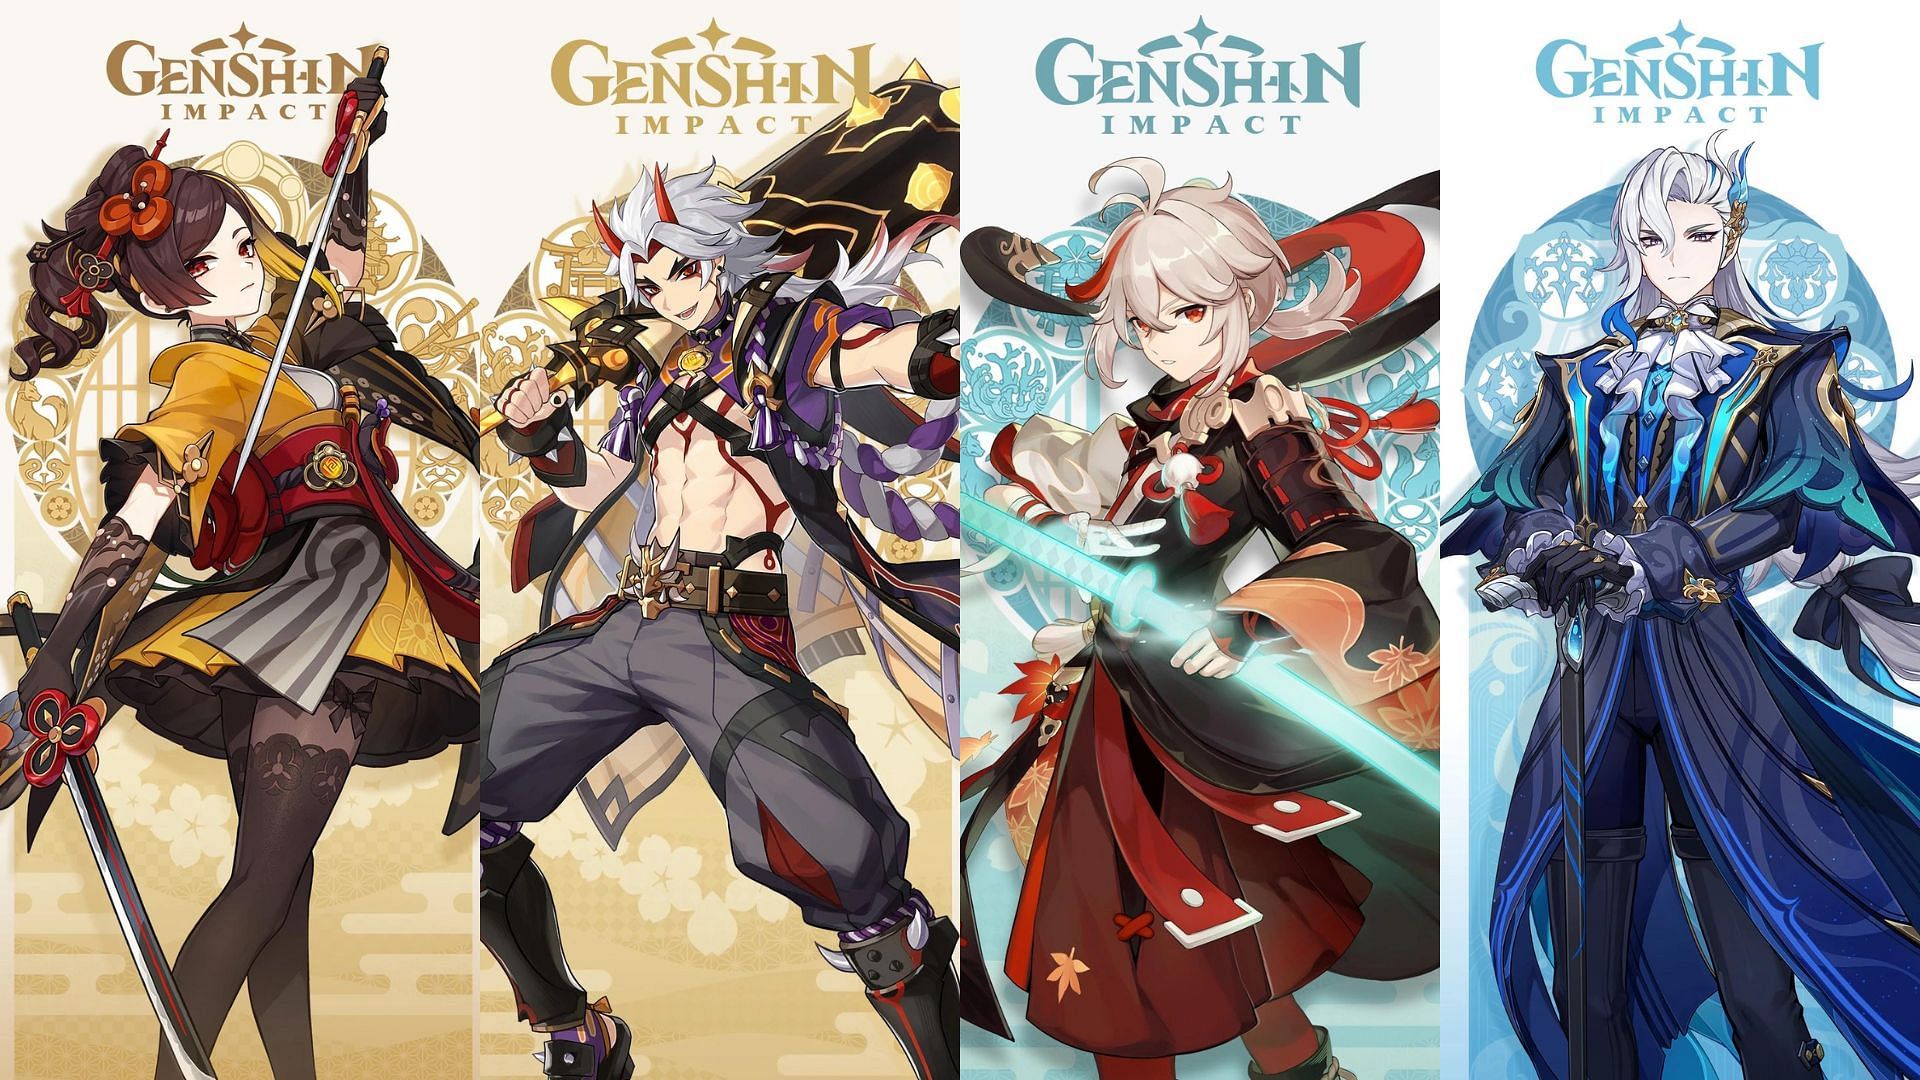 Genshin Impact 4.5 events and official banners